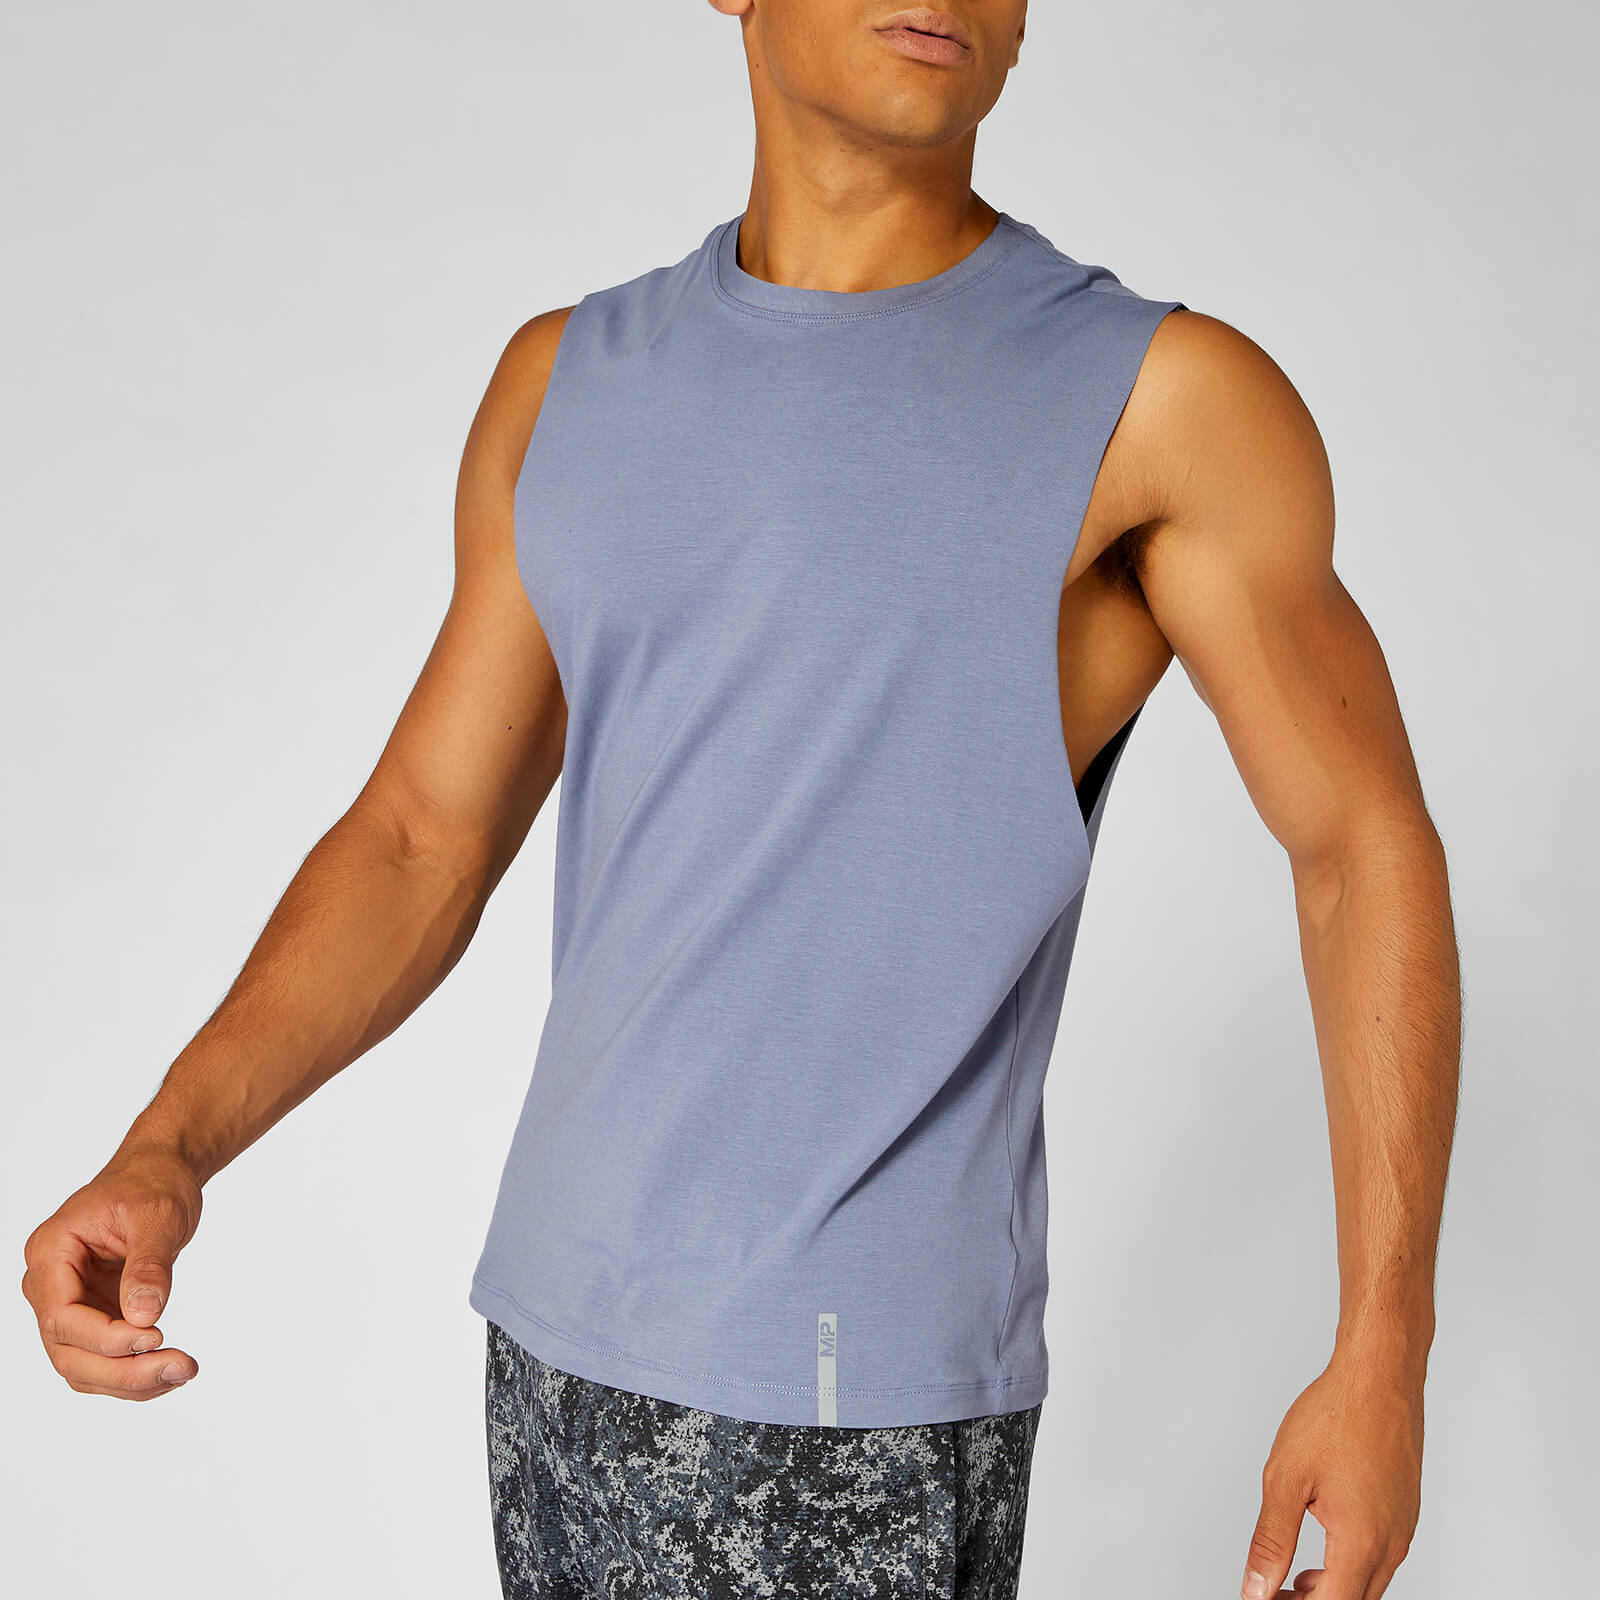 Myprotein Luxe Classic Drop Armhole Tank Top - Nightshade - S